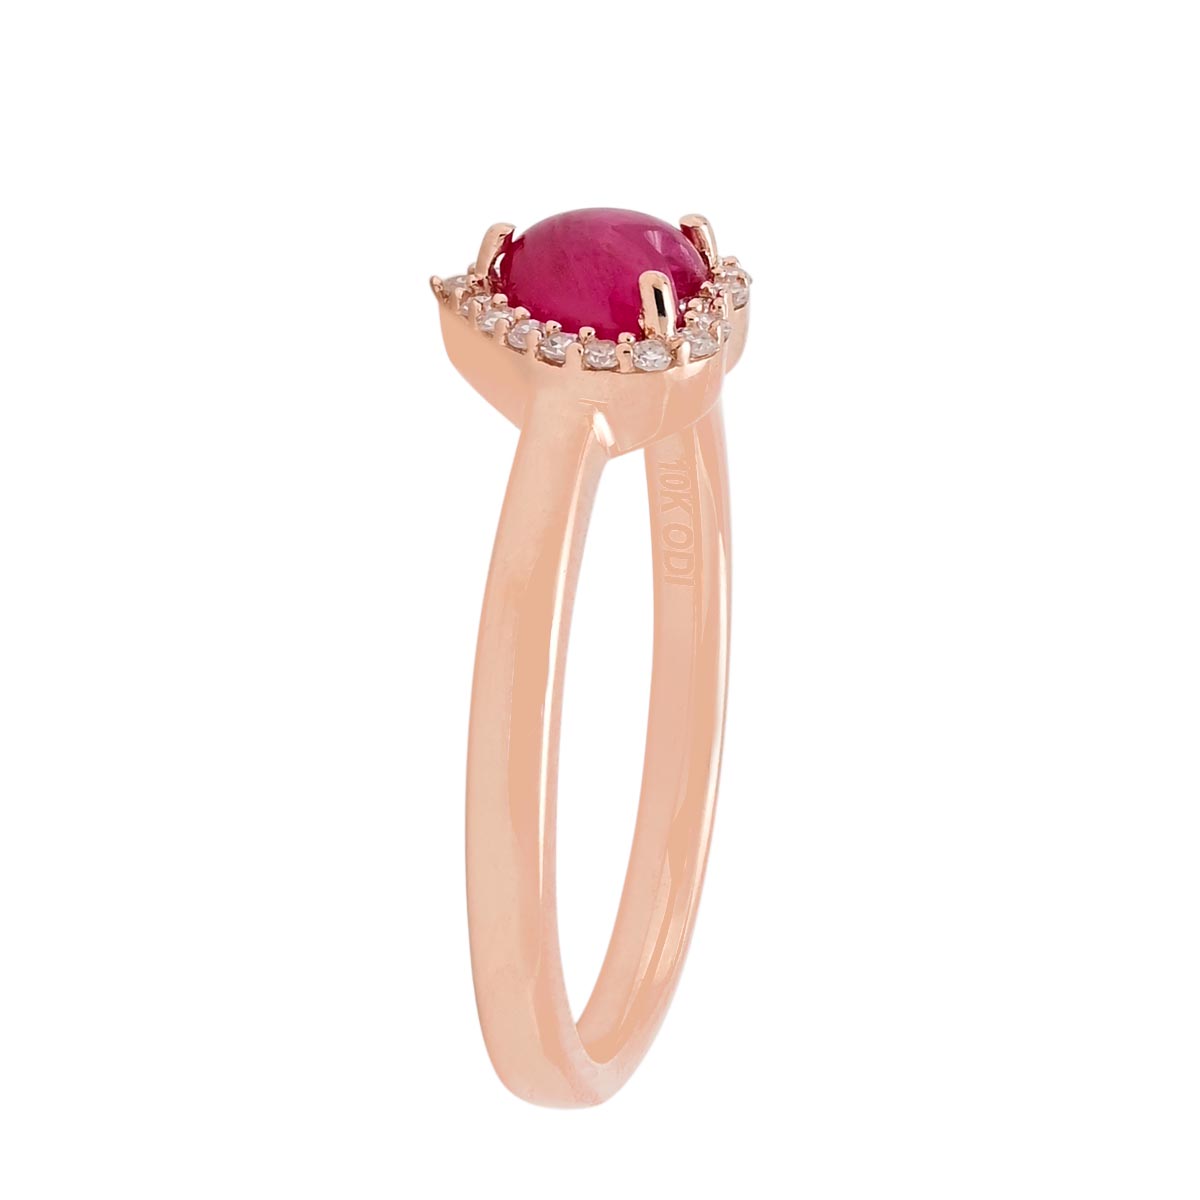 Greenland Ruby Heart Ring in 10kt Rose Gold with Diamonds (1/10ct tw)